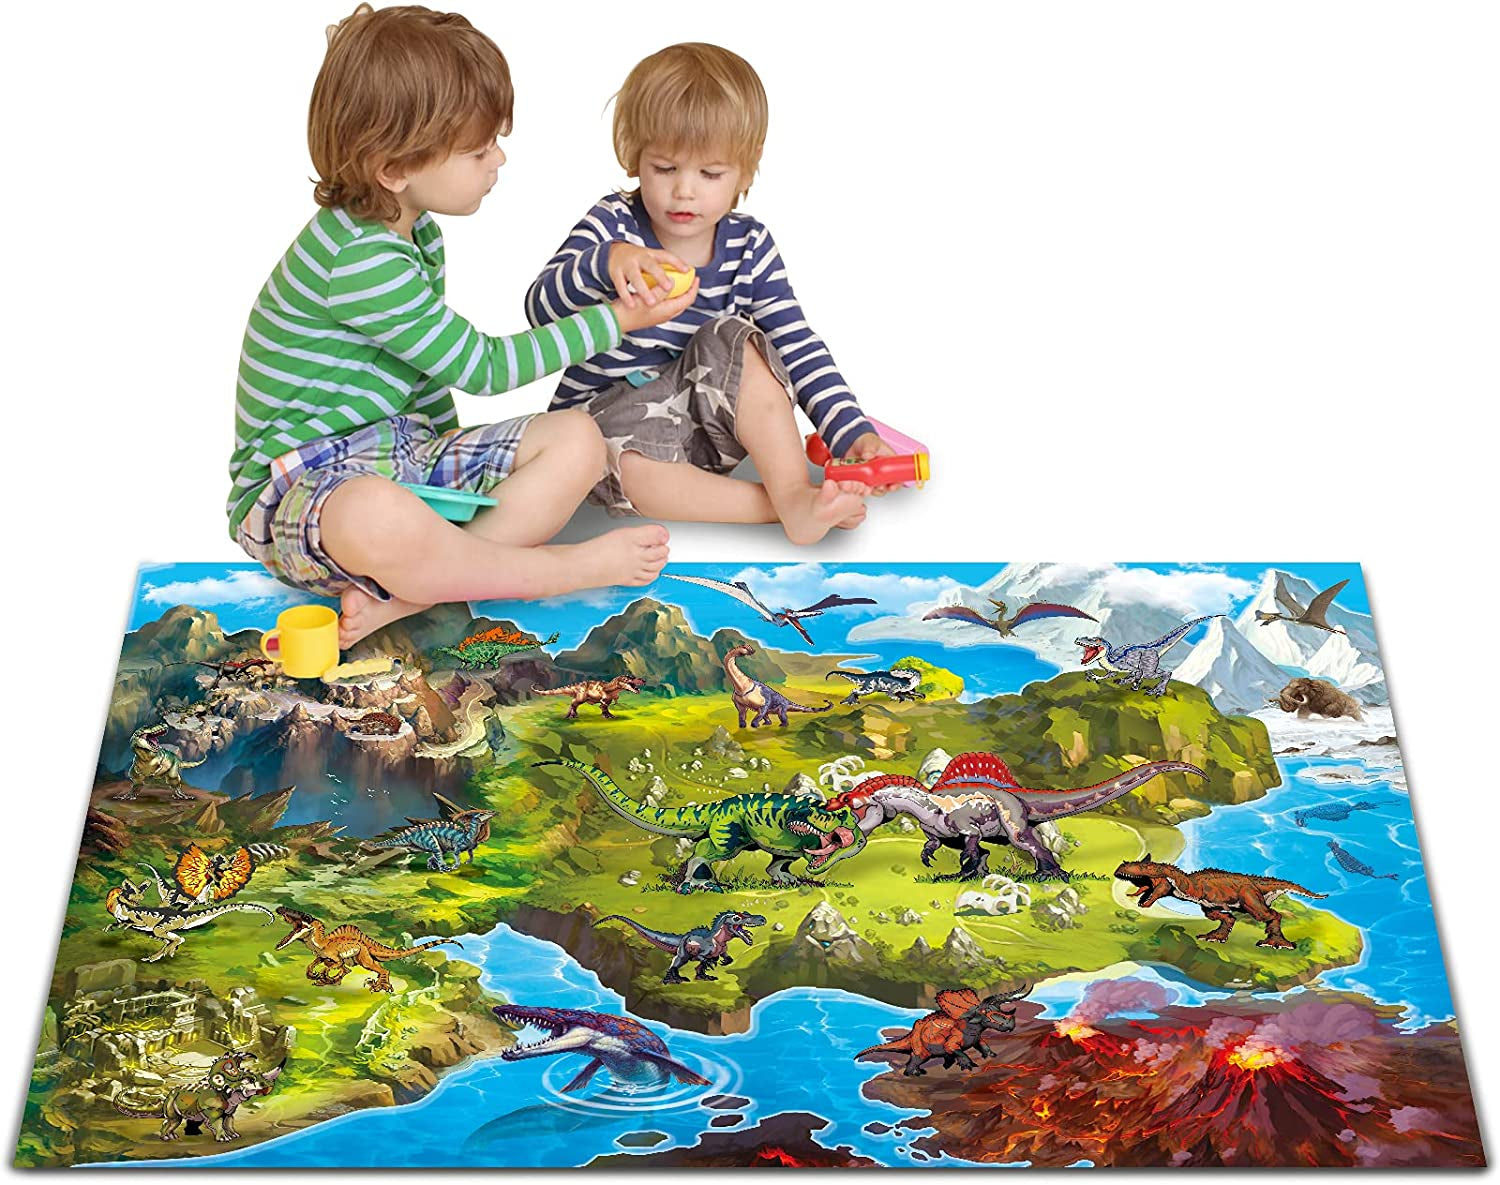 Kids Dream Mat Modern City Toy Activity Playmat, Parent-Child Interaction Game Map Rug, Ideal Children'S Educational Road Traffic City Life Pretend Play 552-C